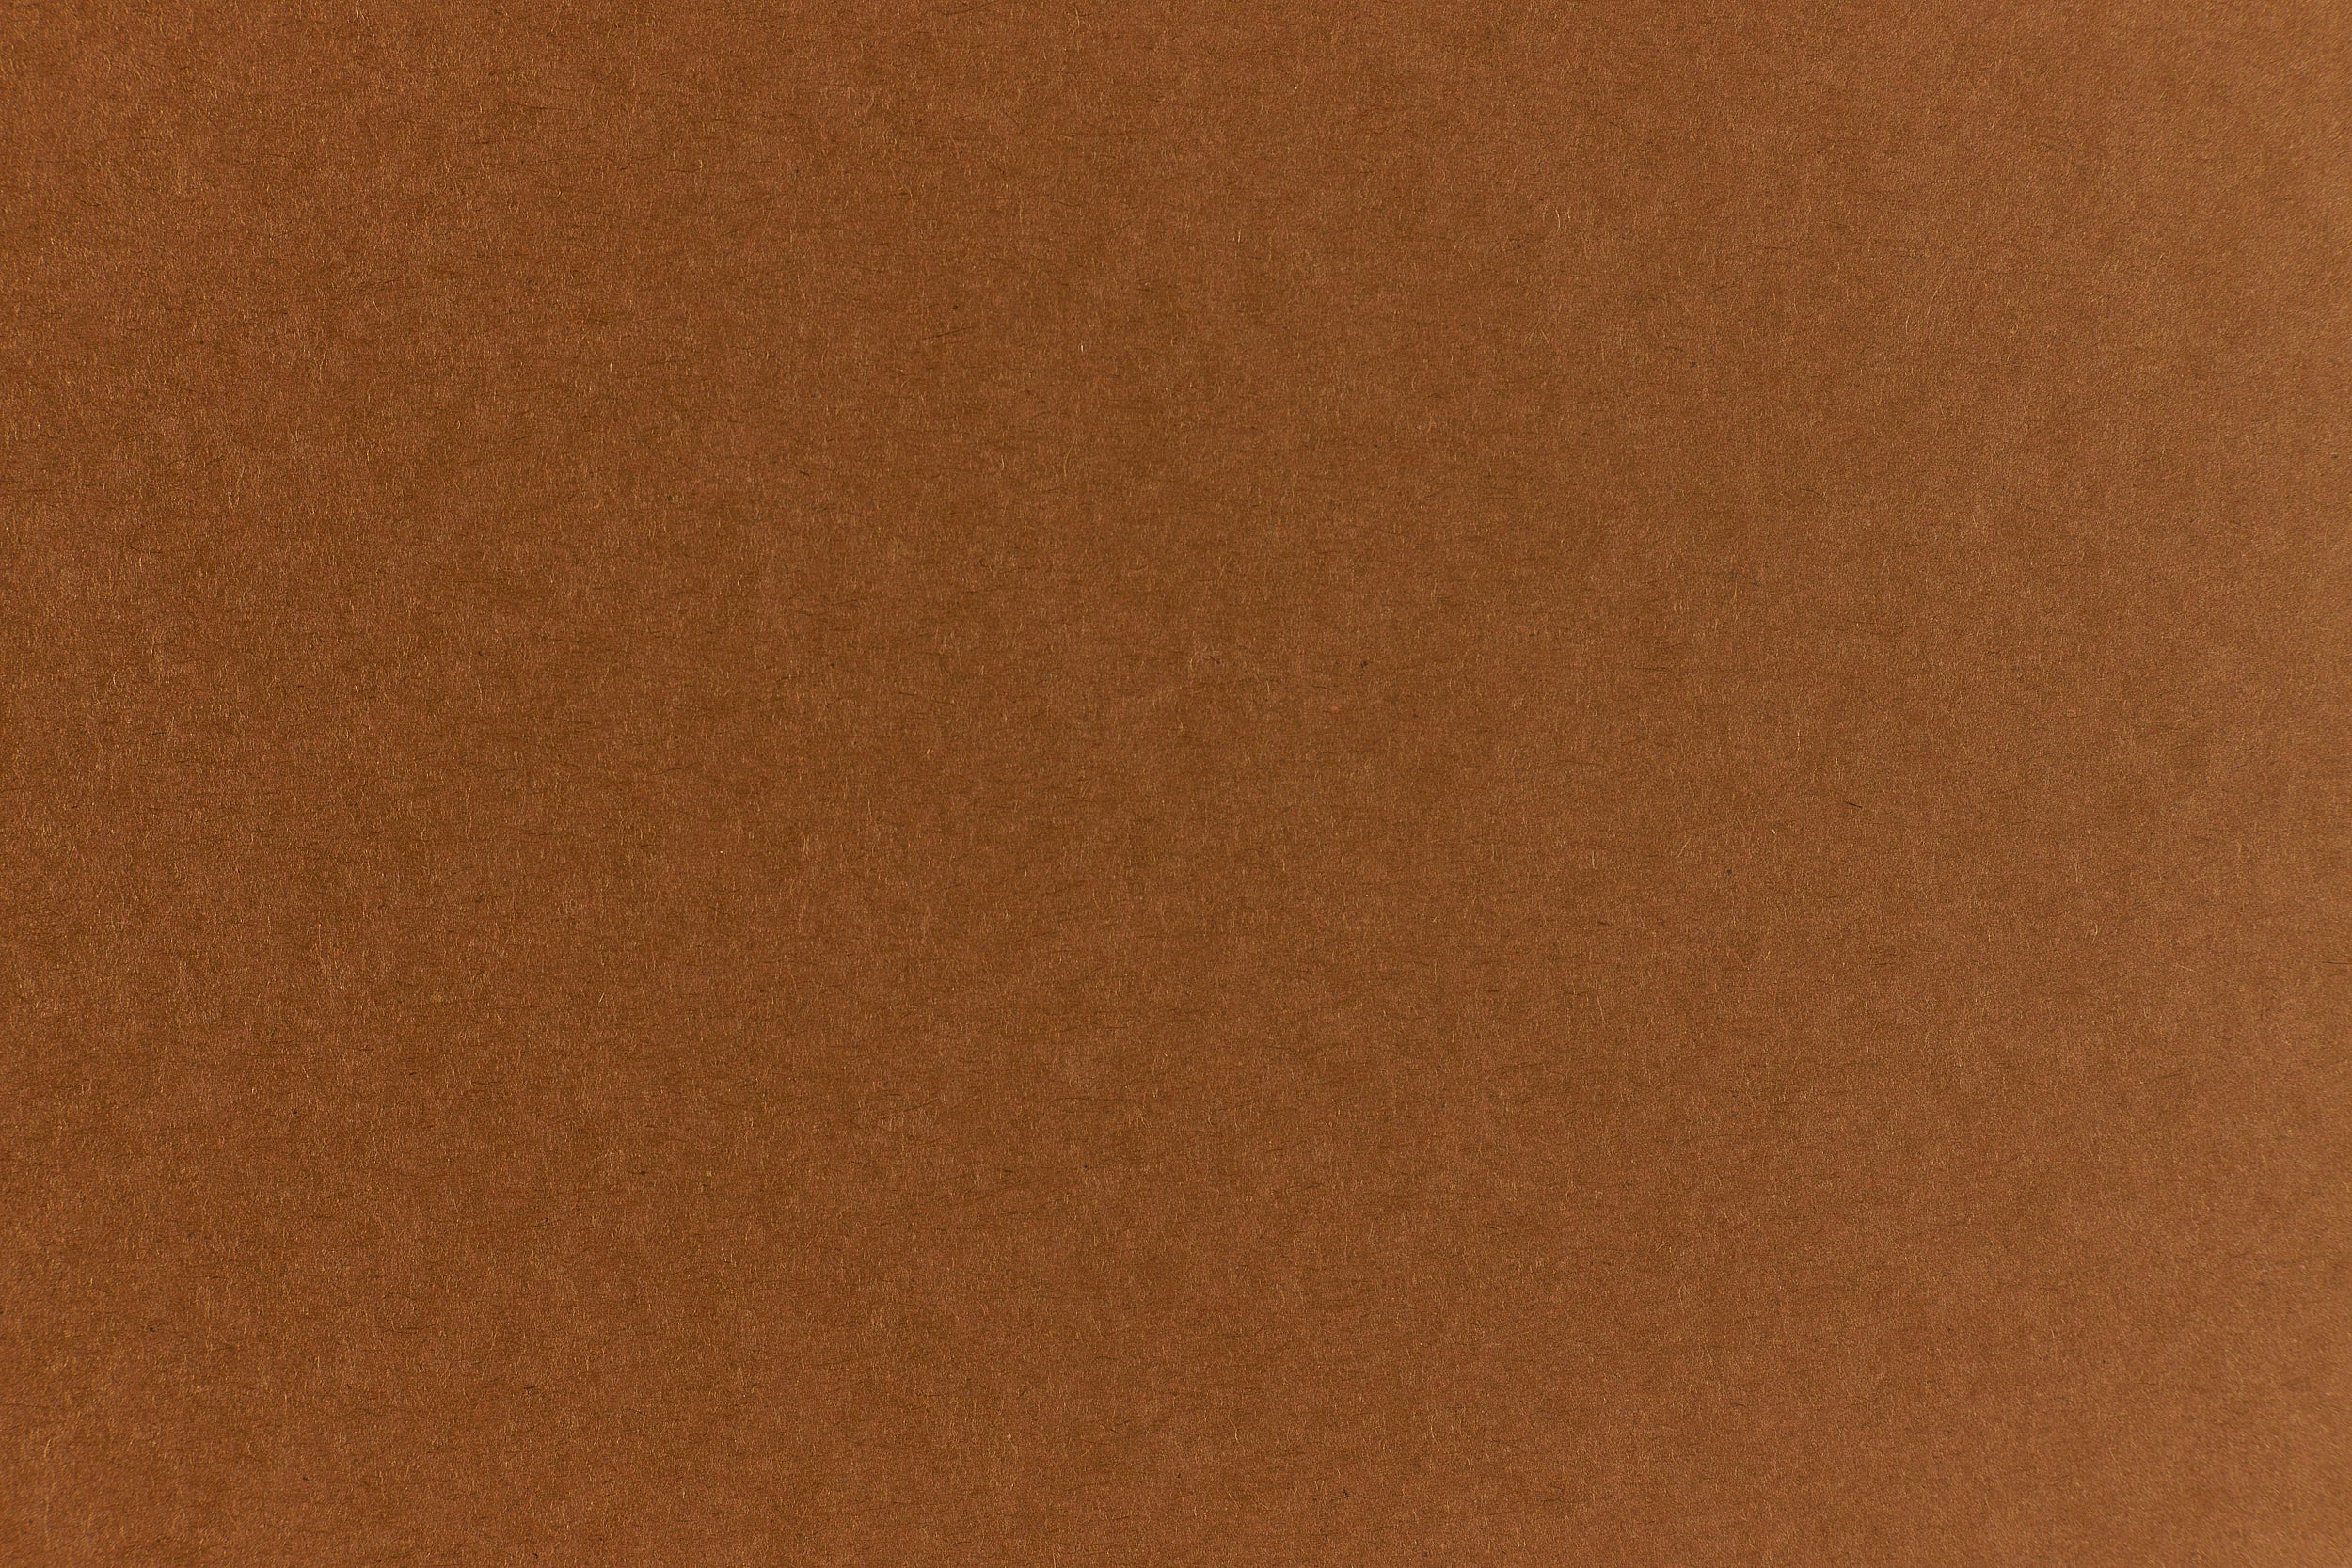 Packing Brown Wrap Paper - 25 x 38 in 70 lb Text Smooth 100% Recycled